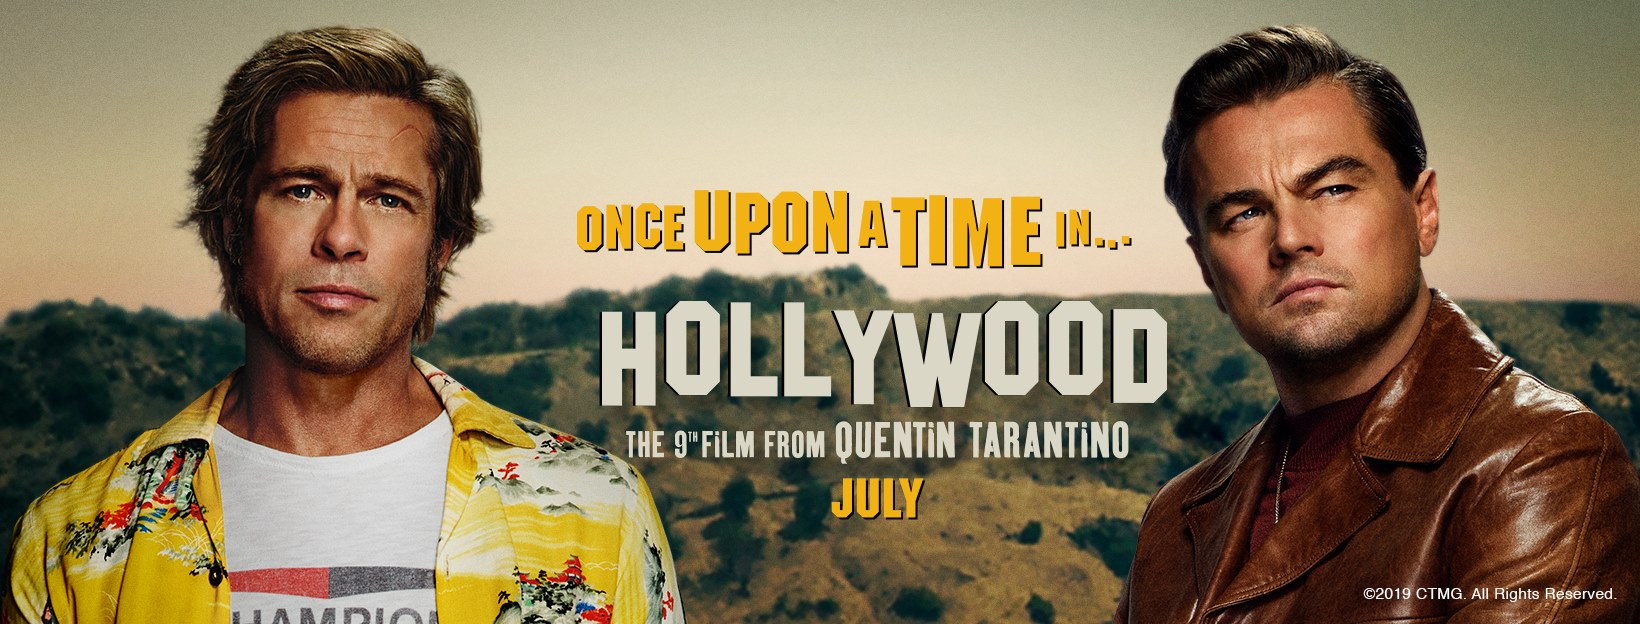 'Once Upon A Time in Hollywood' - Review - Geekdom-MOVIES!